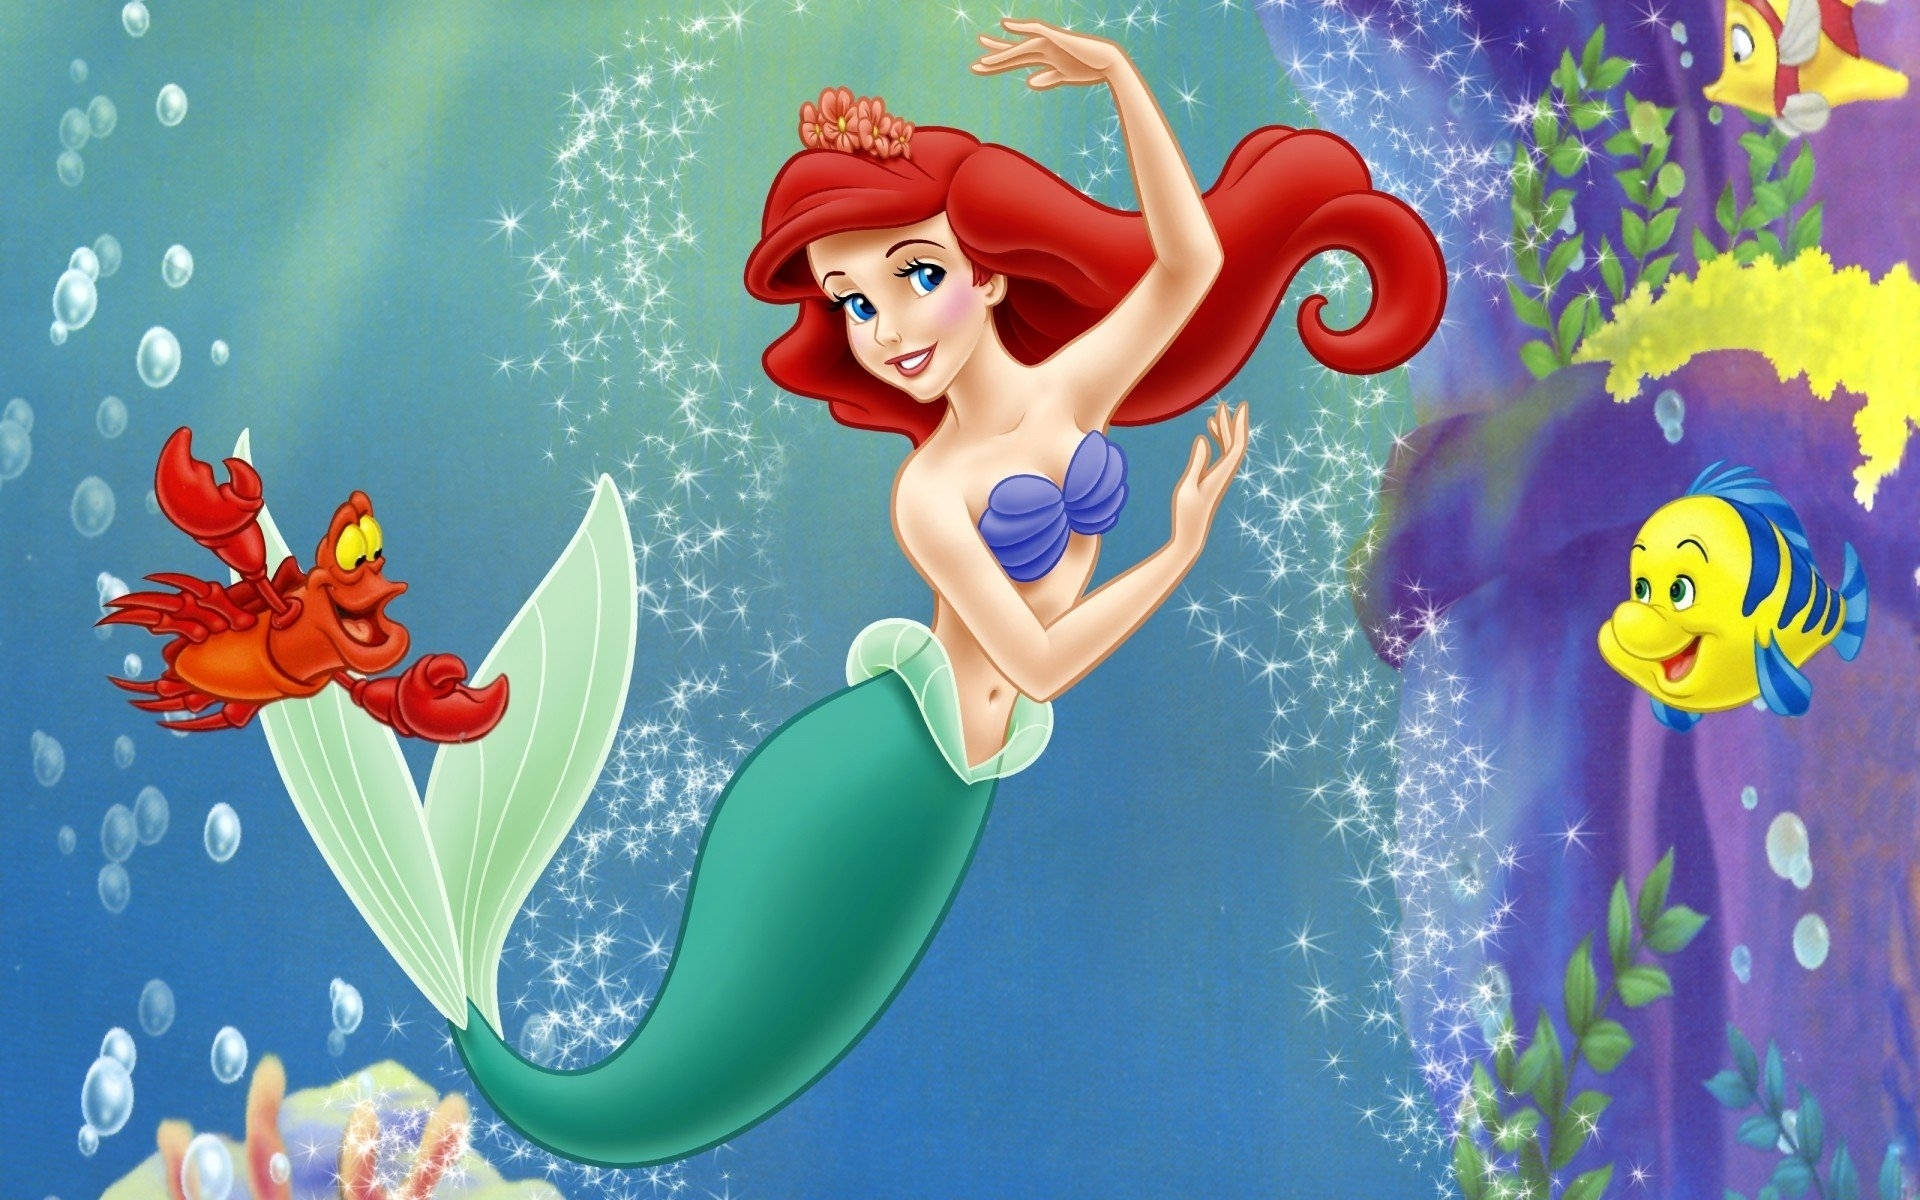 Disney Princess Ariel With Fishes Background